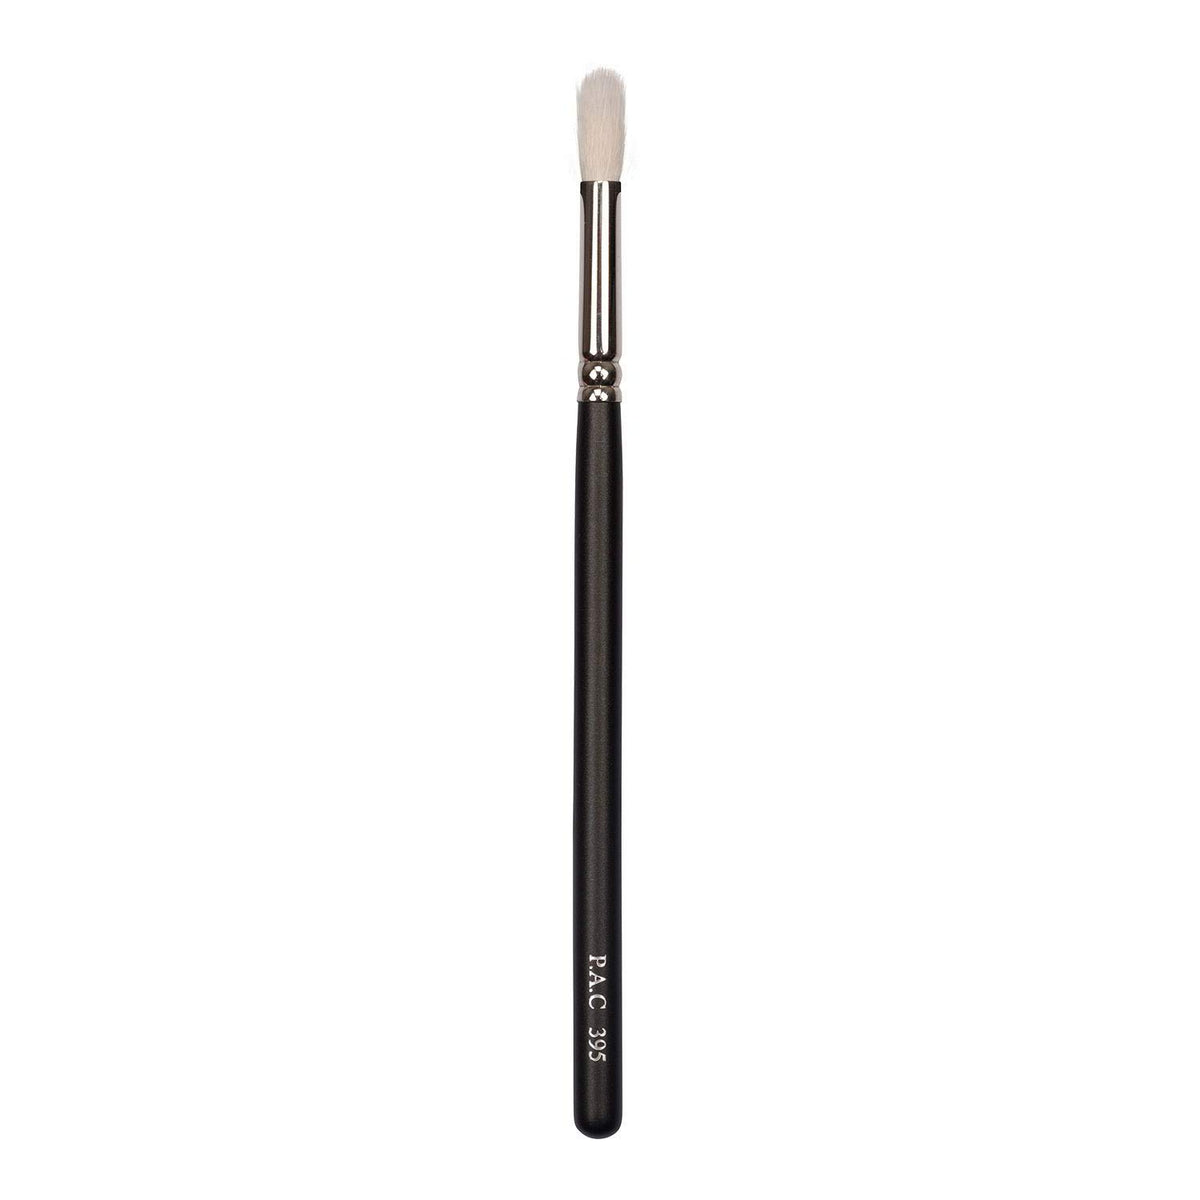 PAC Concealer Brush 395 PAC